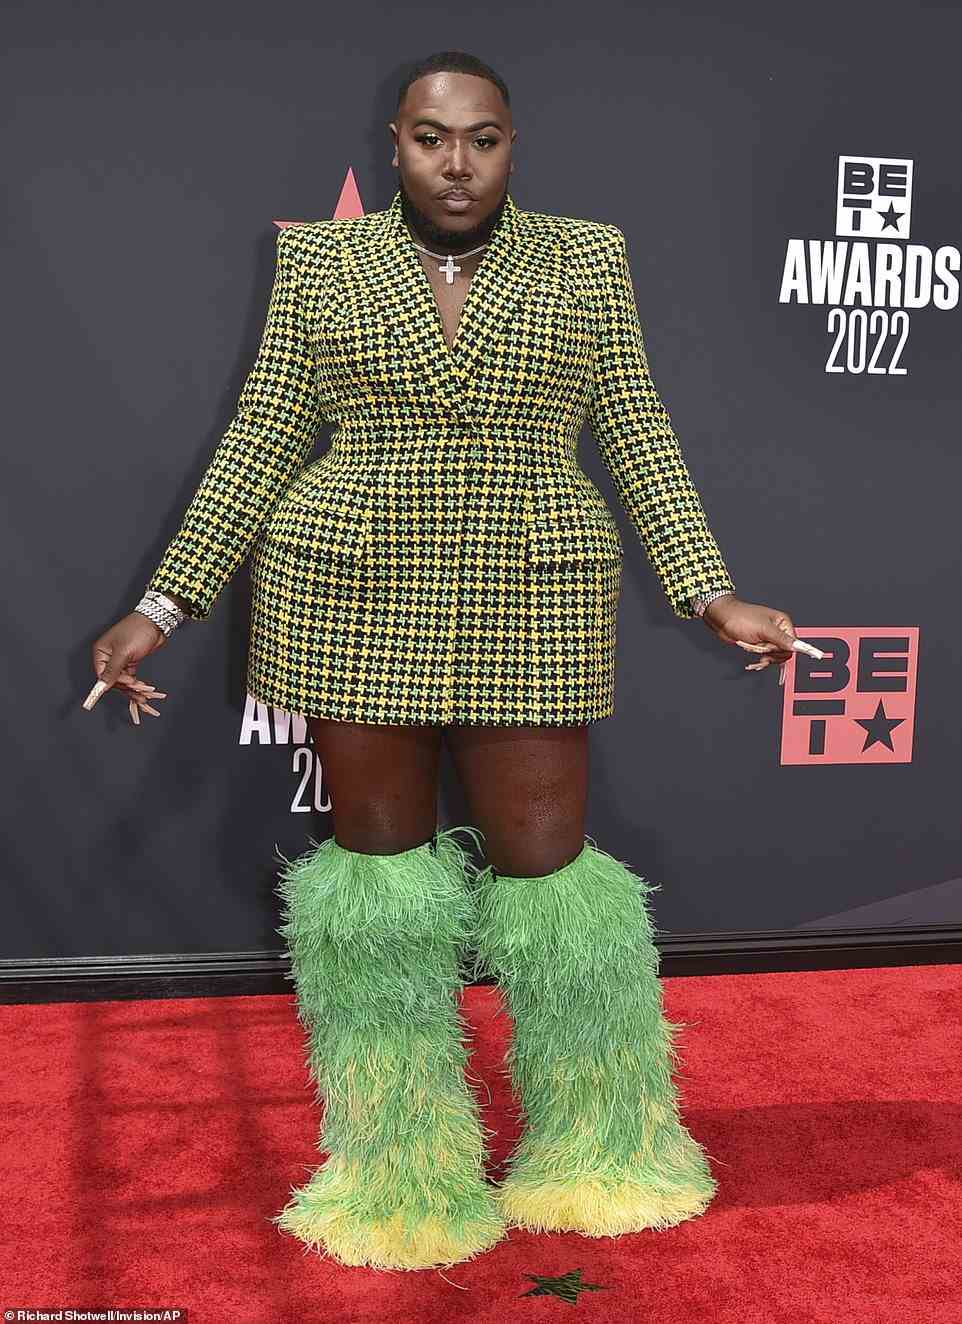 These boots were made for walking! Rapper Saucy Santana, 28, made quite the entrance in a plaid green and yellow structured blazer dress and massive furry boots